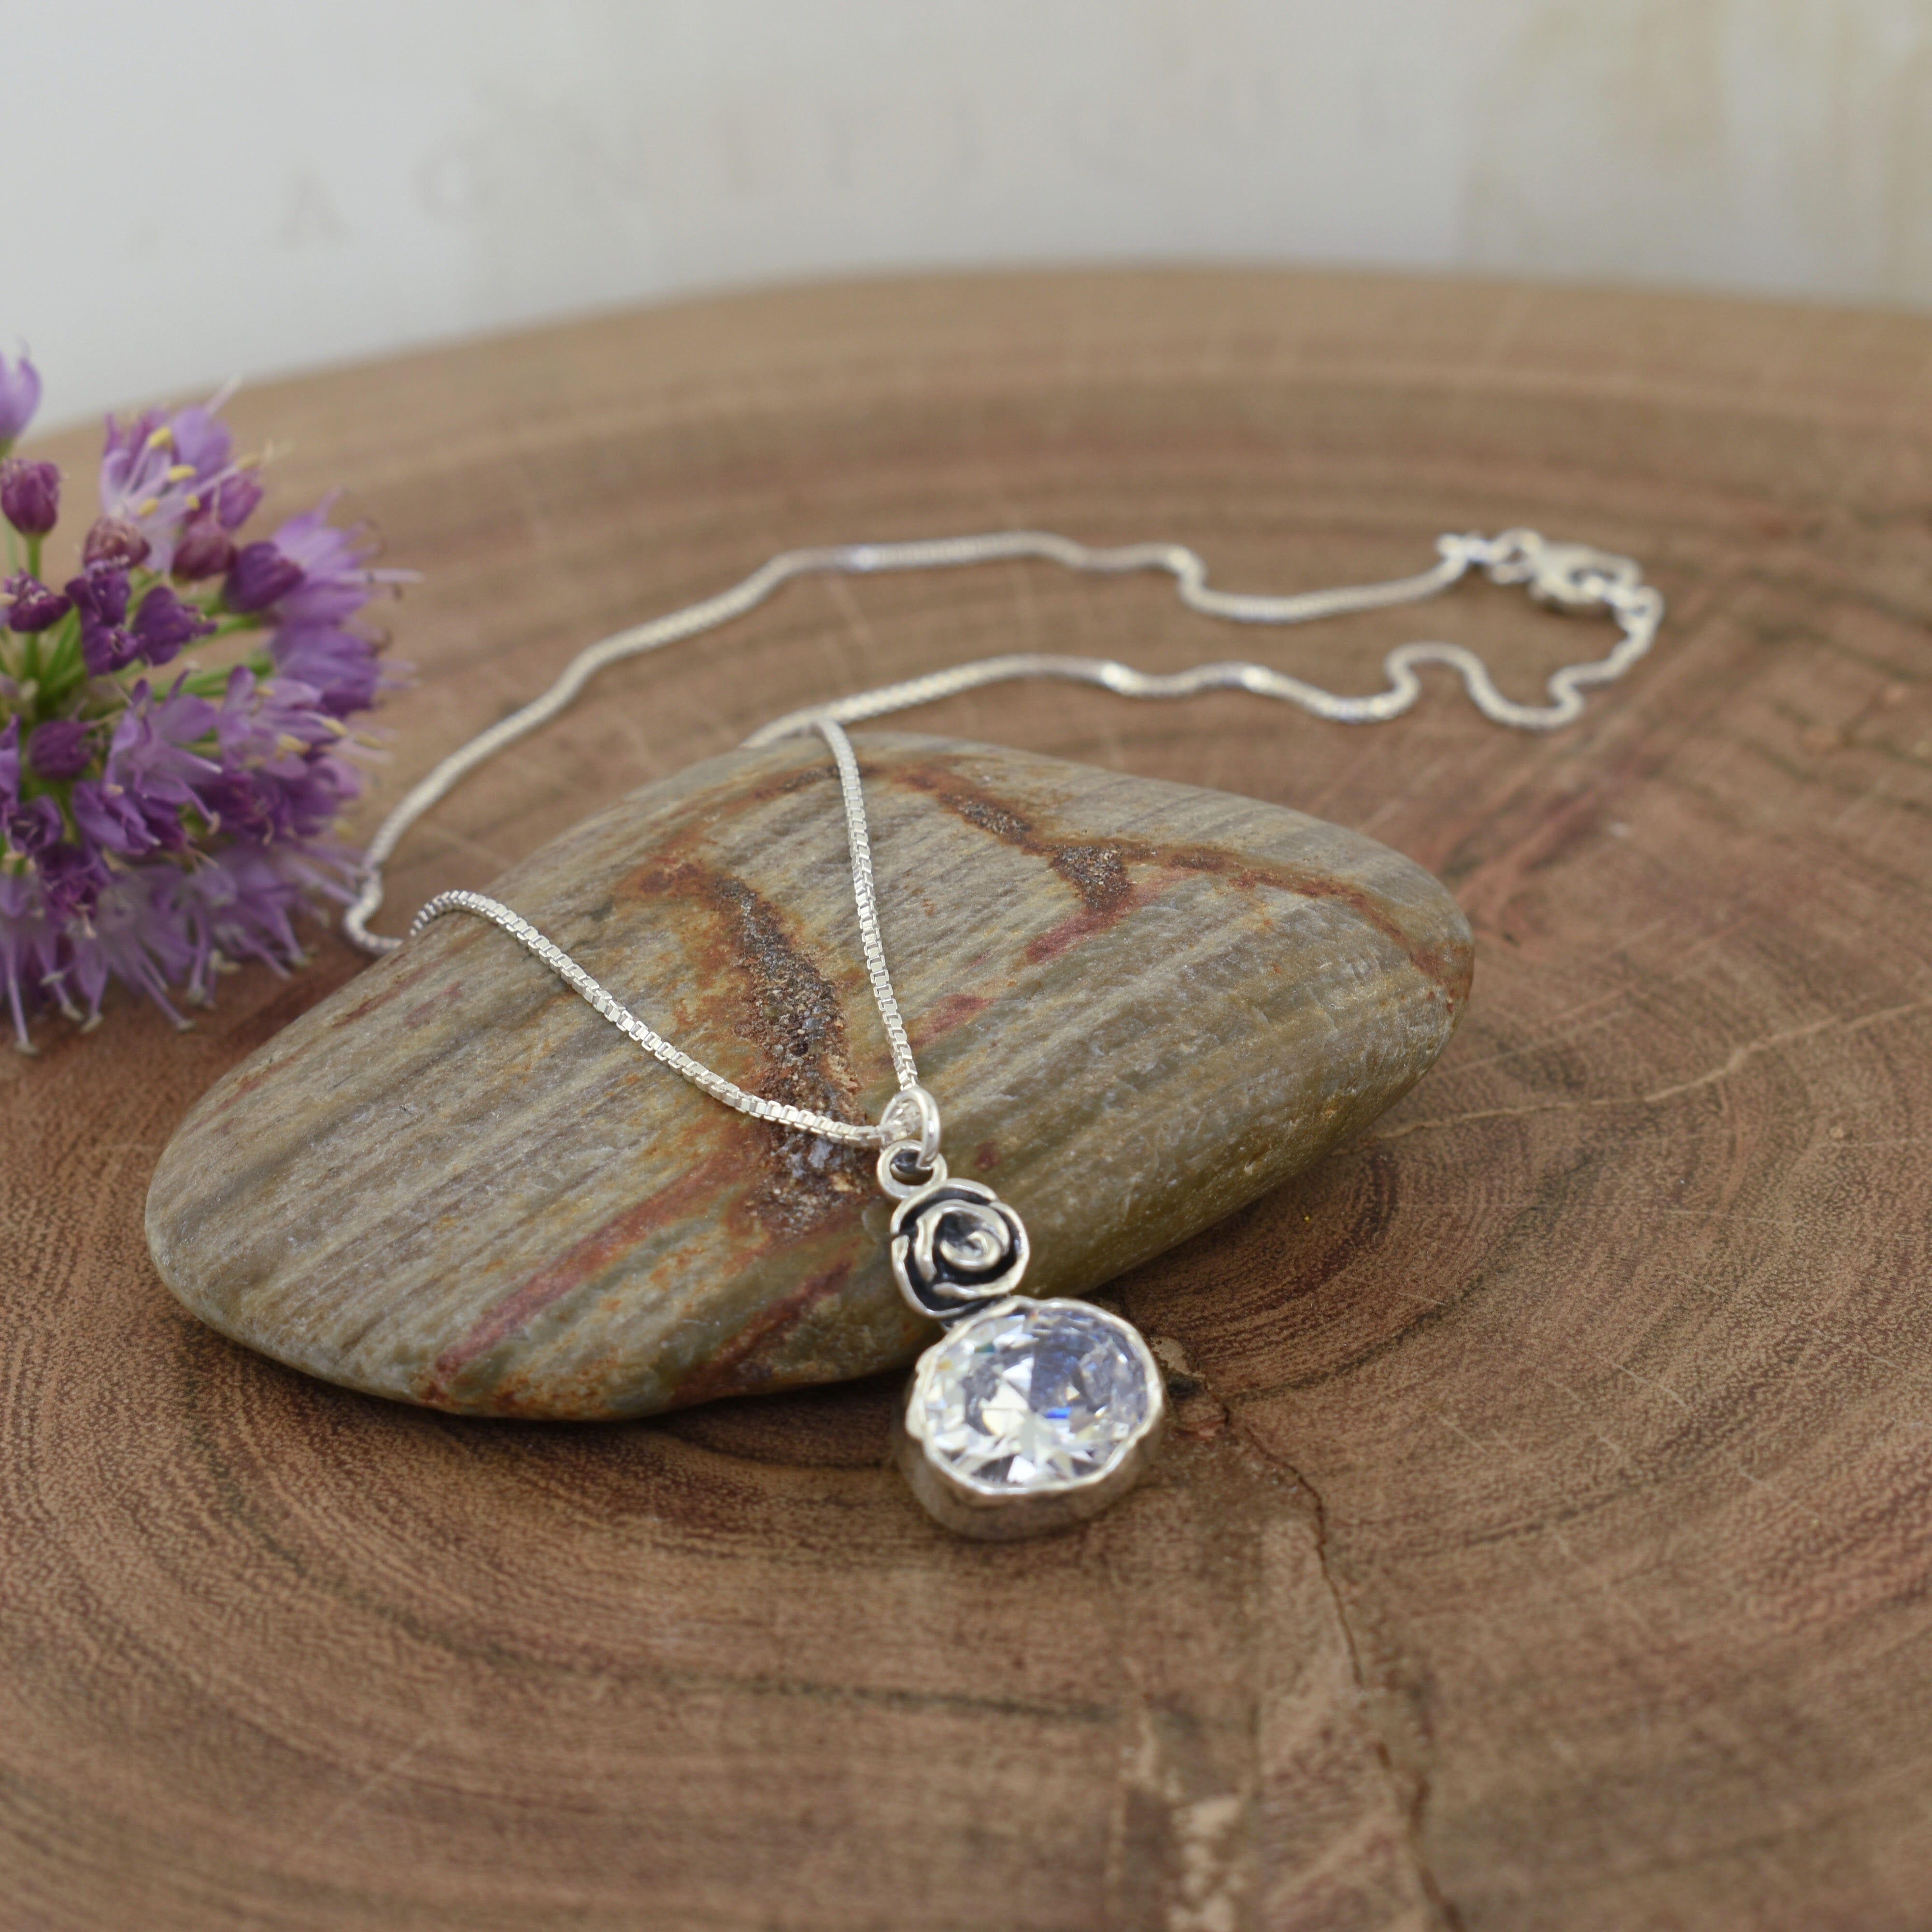 .925 sterling silver necklace with CZ and rose